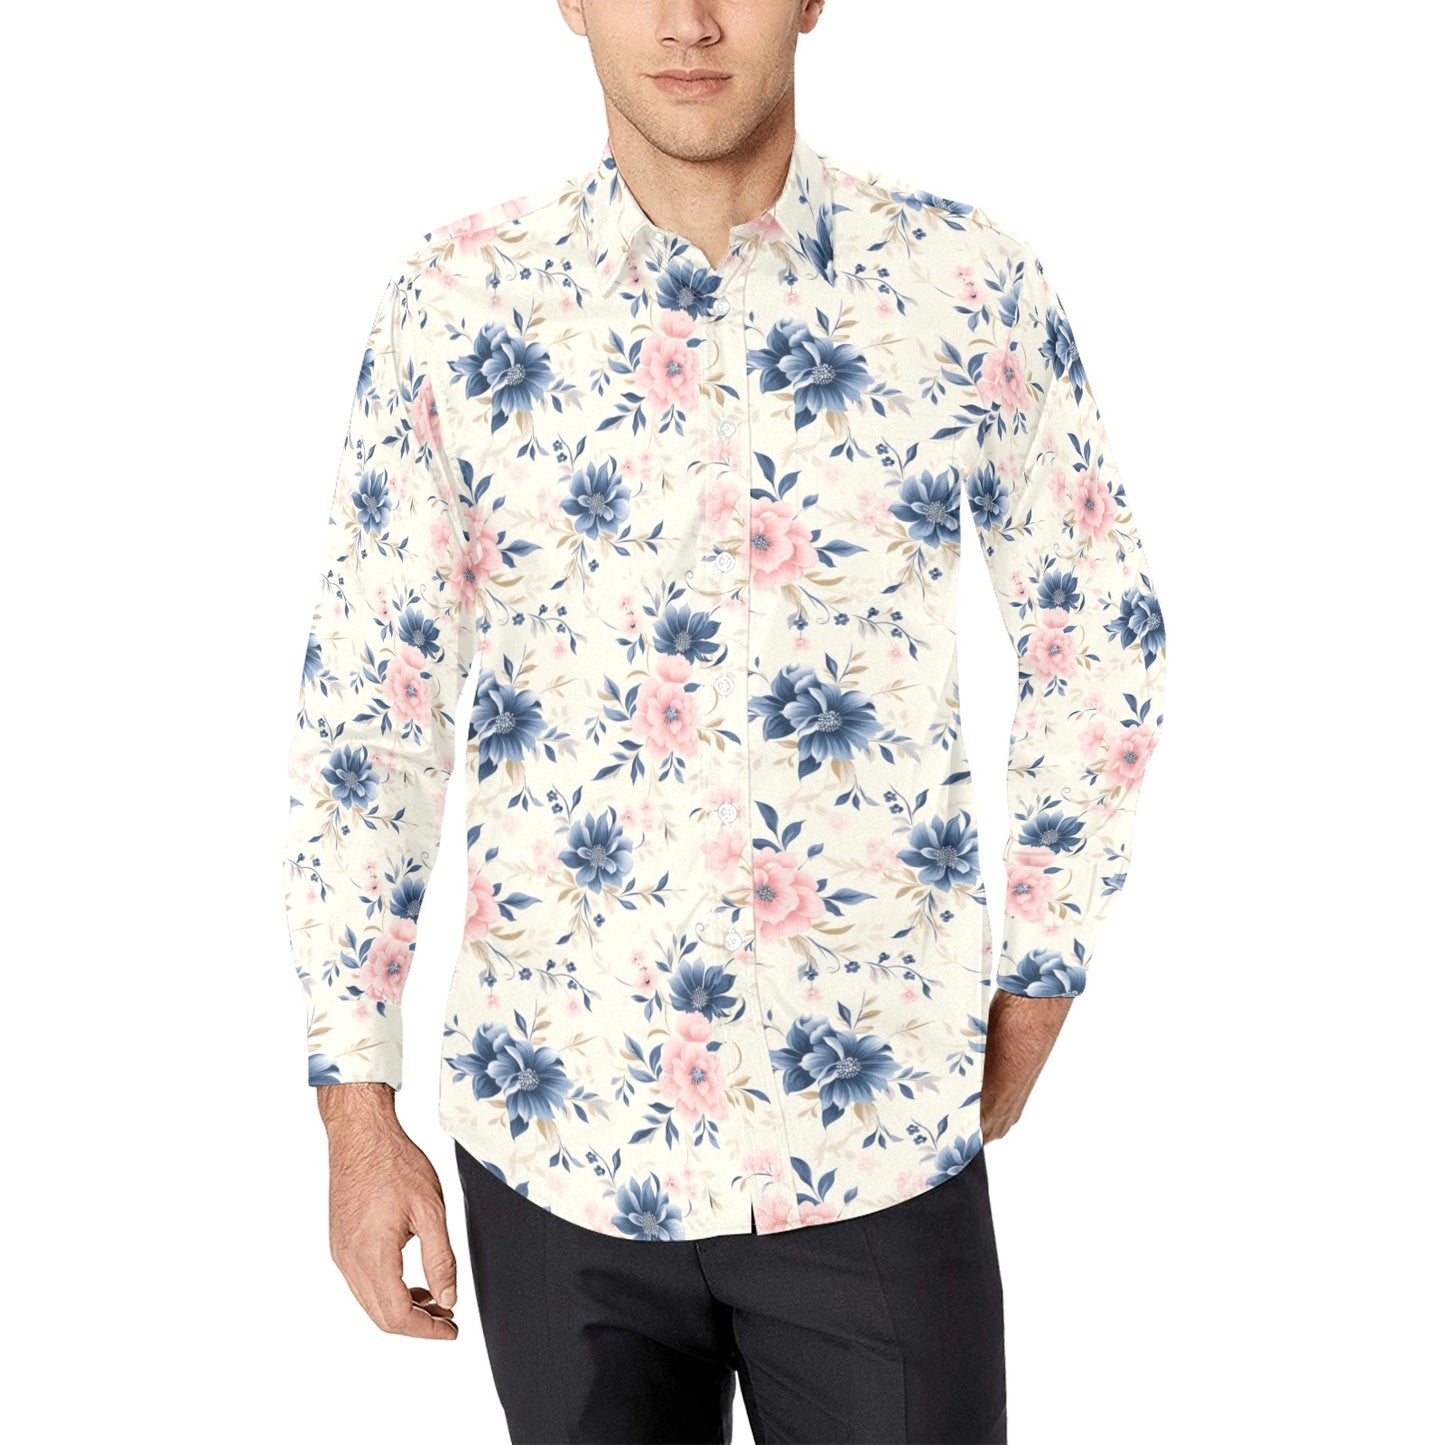 Pink Blue Floral Long Sleeve Men Button Up Shirt, White Flowers Print White Casual Buttoned Collared Designer Dress Shirt with Chest Pocket Starcove Fashion